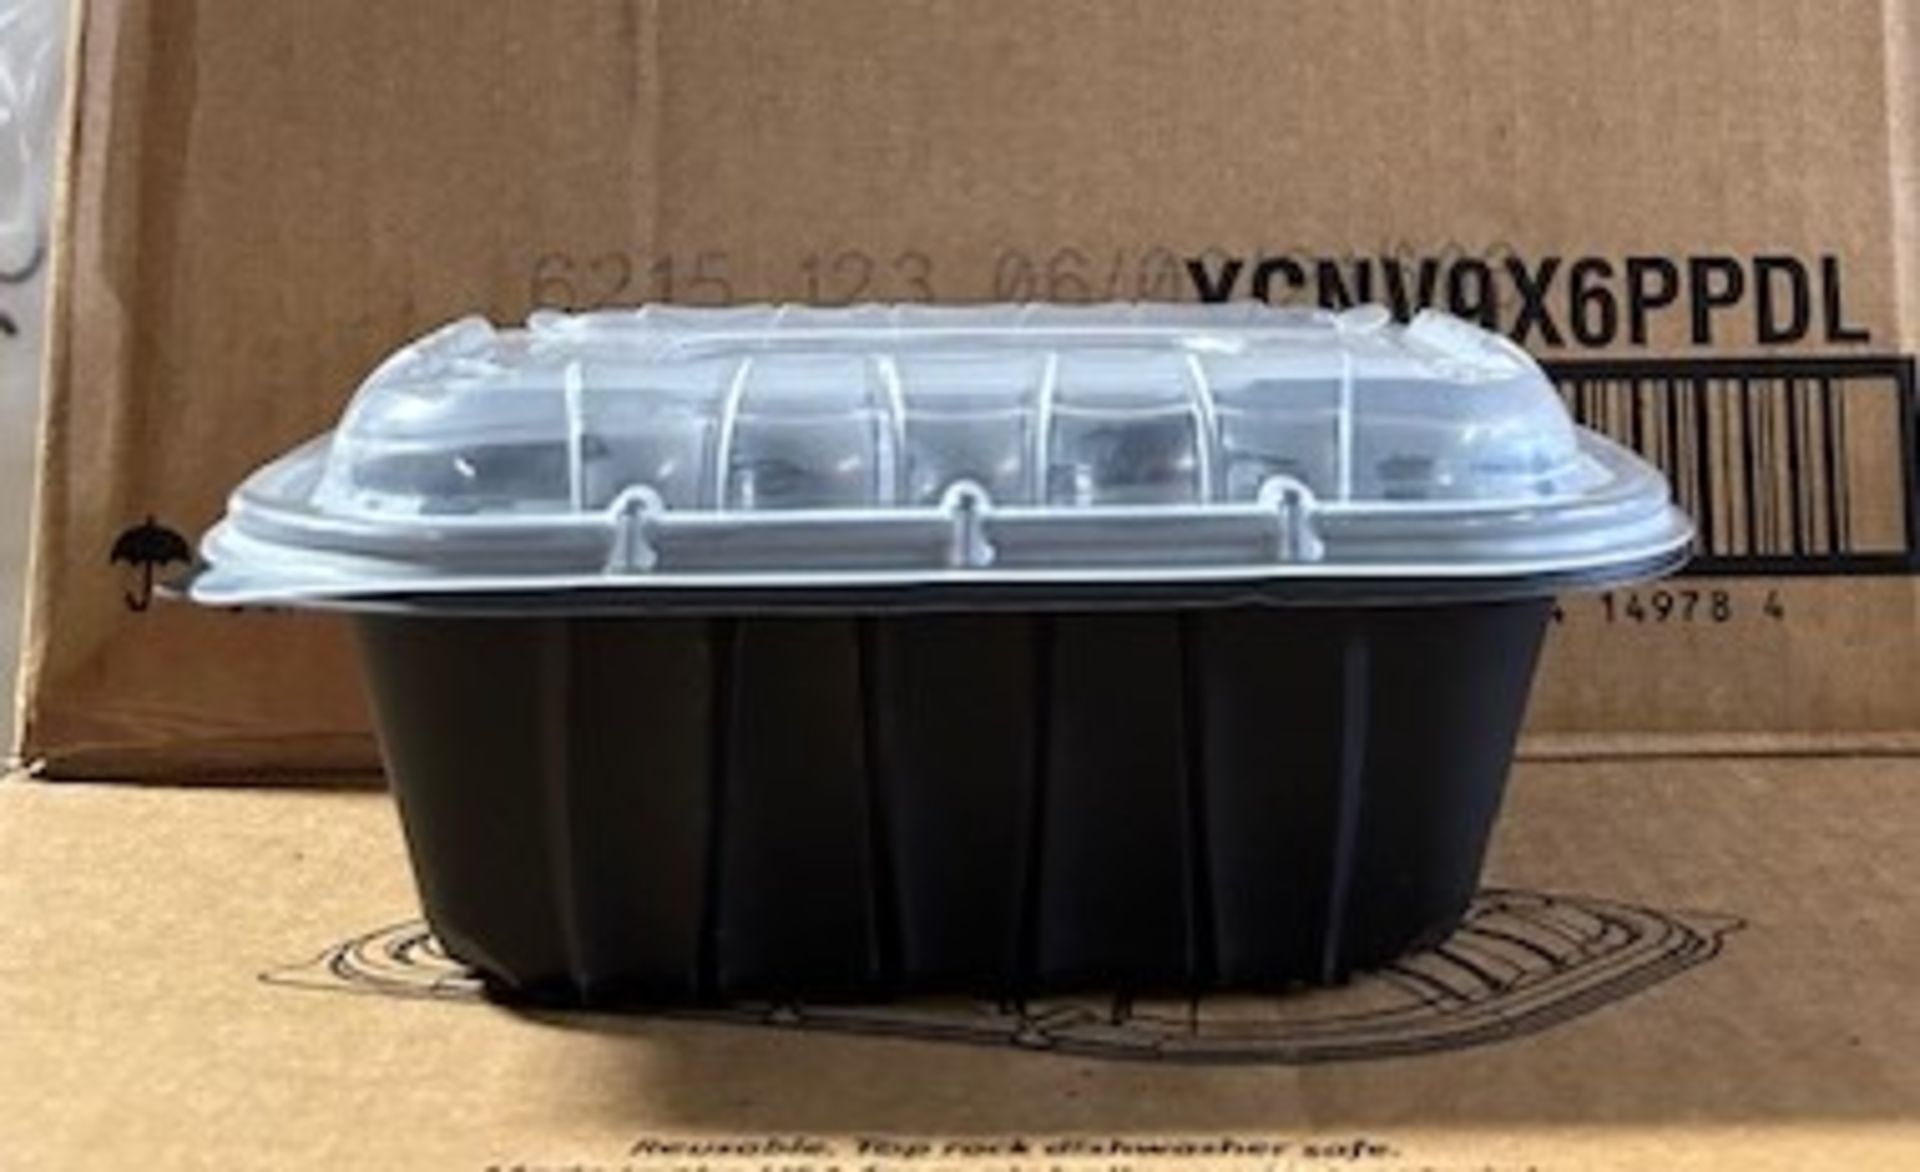 LOT - Pactiv YCNB9X632000 & YCNV9X6PPDL 32 Oz. Black Plastic Container and Lid (3000 Sets)